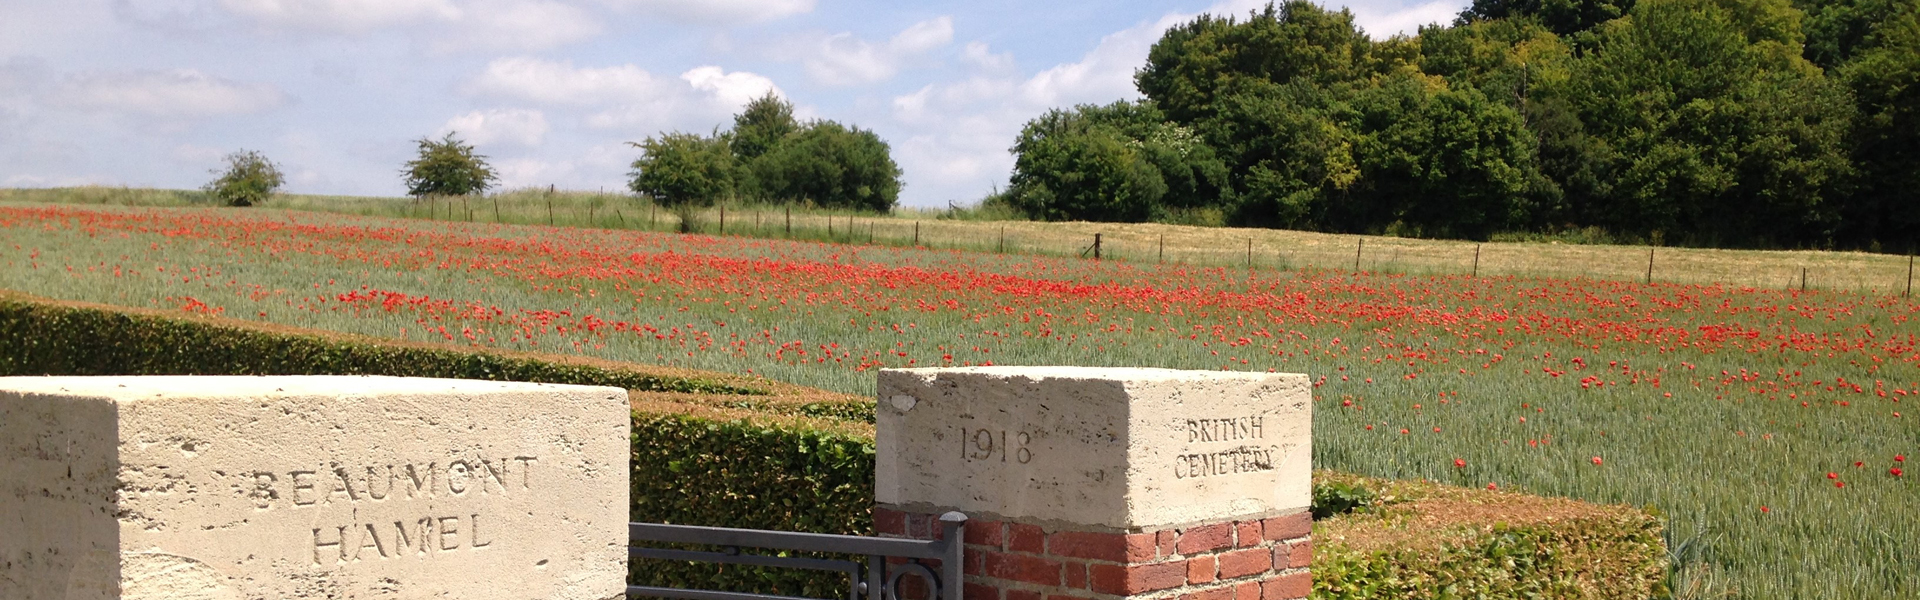 Battlefield Tours by Bike | Green Jersey French Cycling Tours